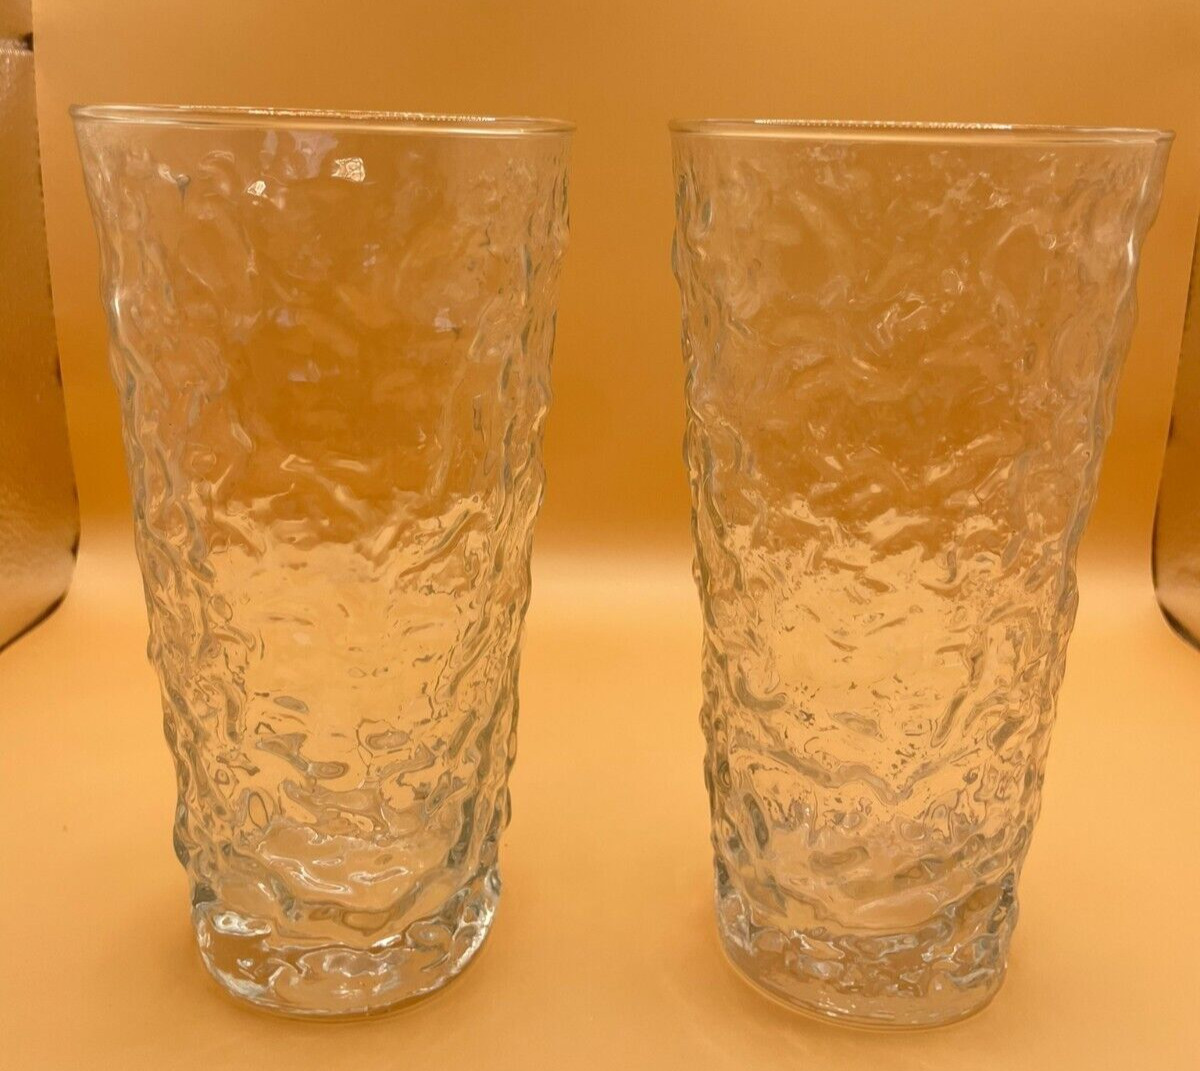 Vintage 1960s Space Age Crinkle Crater Clear Glass Juice Drinking Glass Set of 2